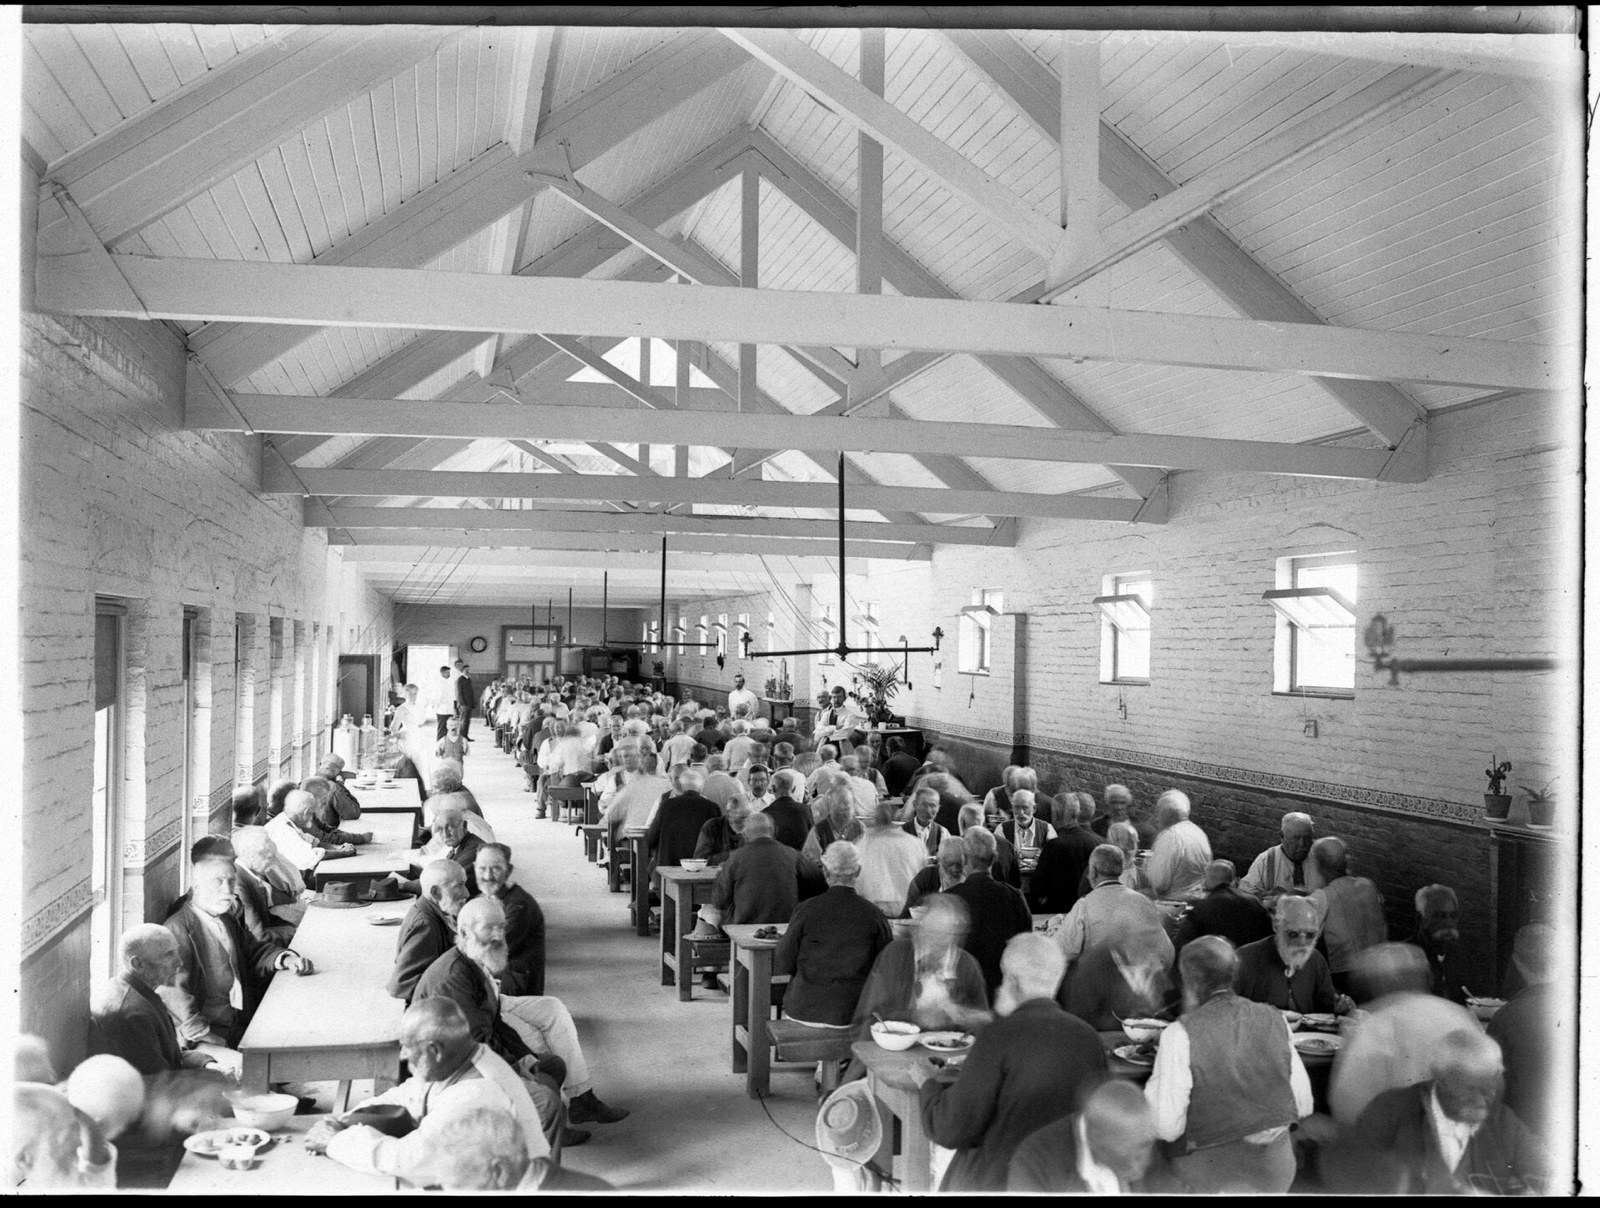 Government Printing Office; NRS 4481, Glass negatives.  NRS-4481-3-[7/15880]-M1925 Government Printing Office 1 - 34395 - General dining room, Liverpool Asylum [From NSW Government Printer series: Department of Public Health]